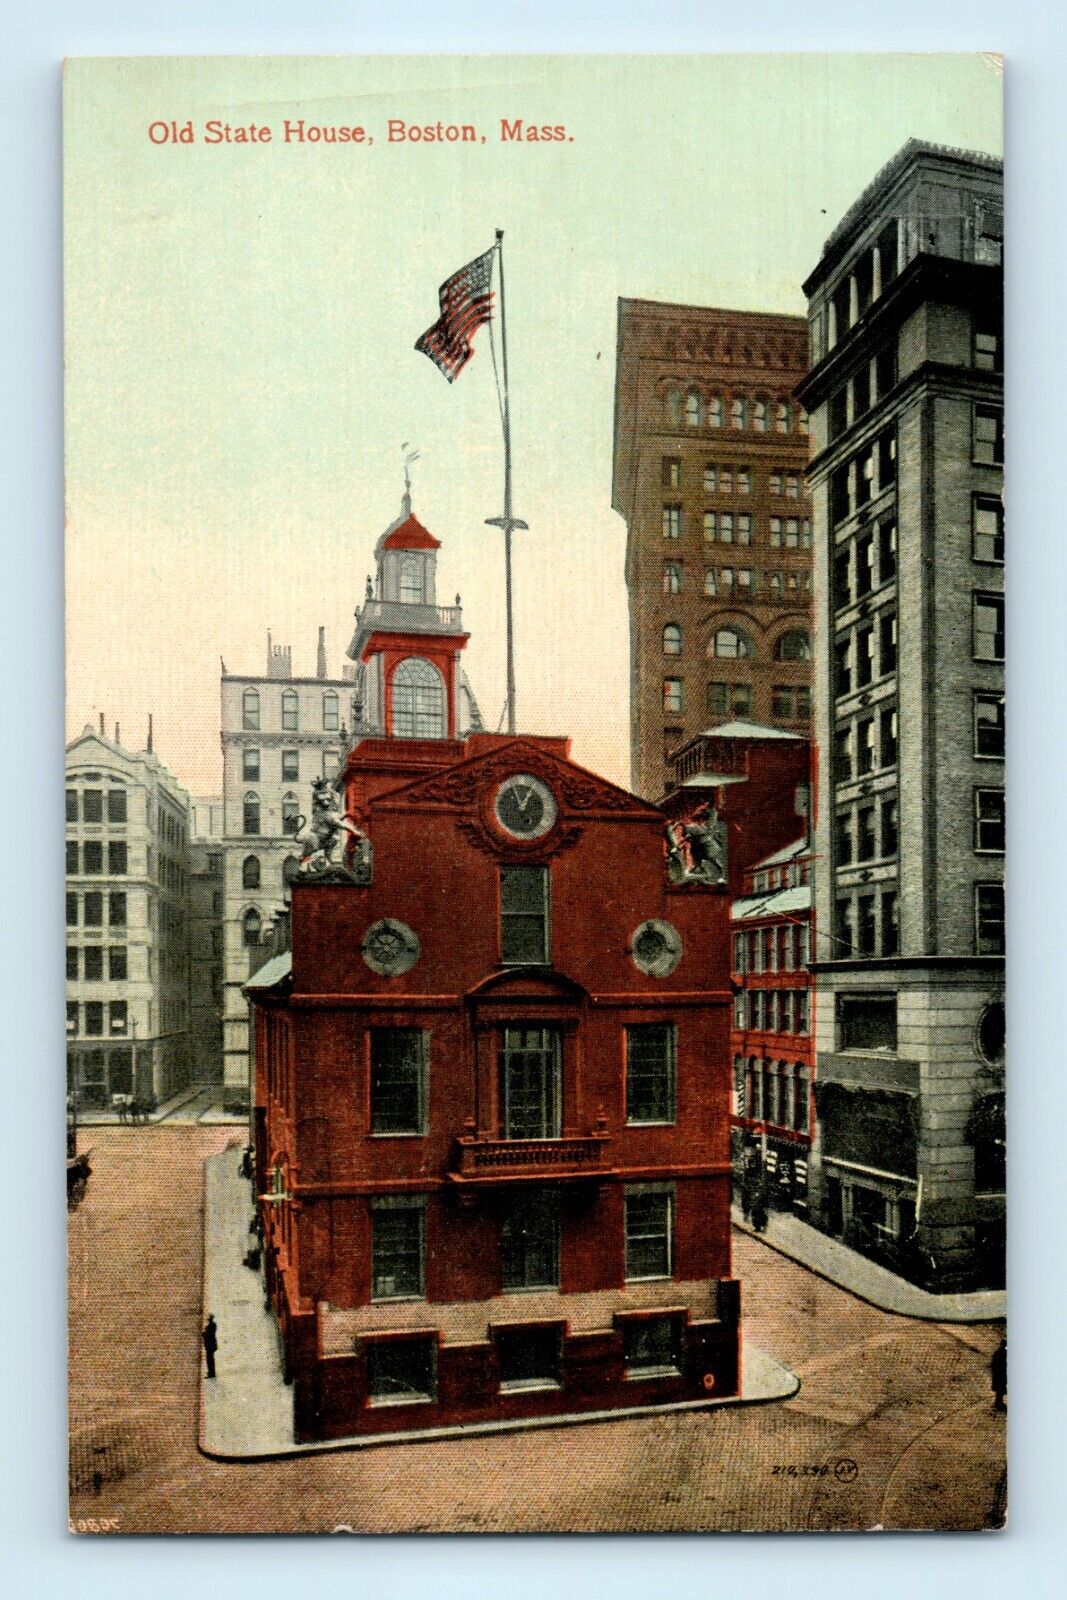 Old State House Boston Mass American Flag Pole Clock Lion Statues Postcard C2